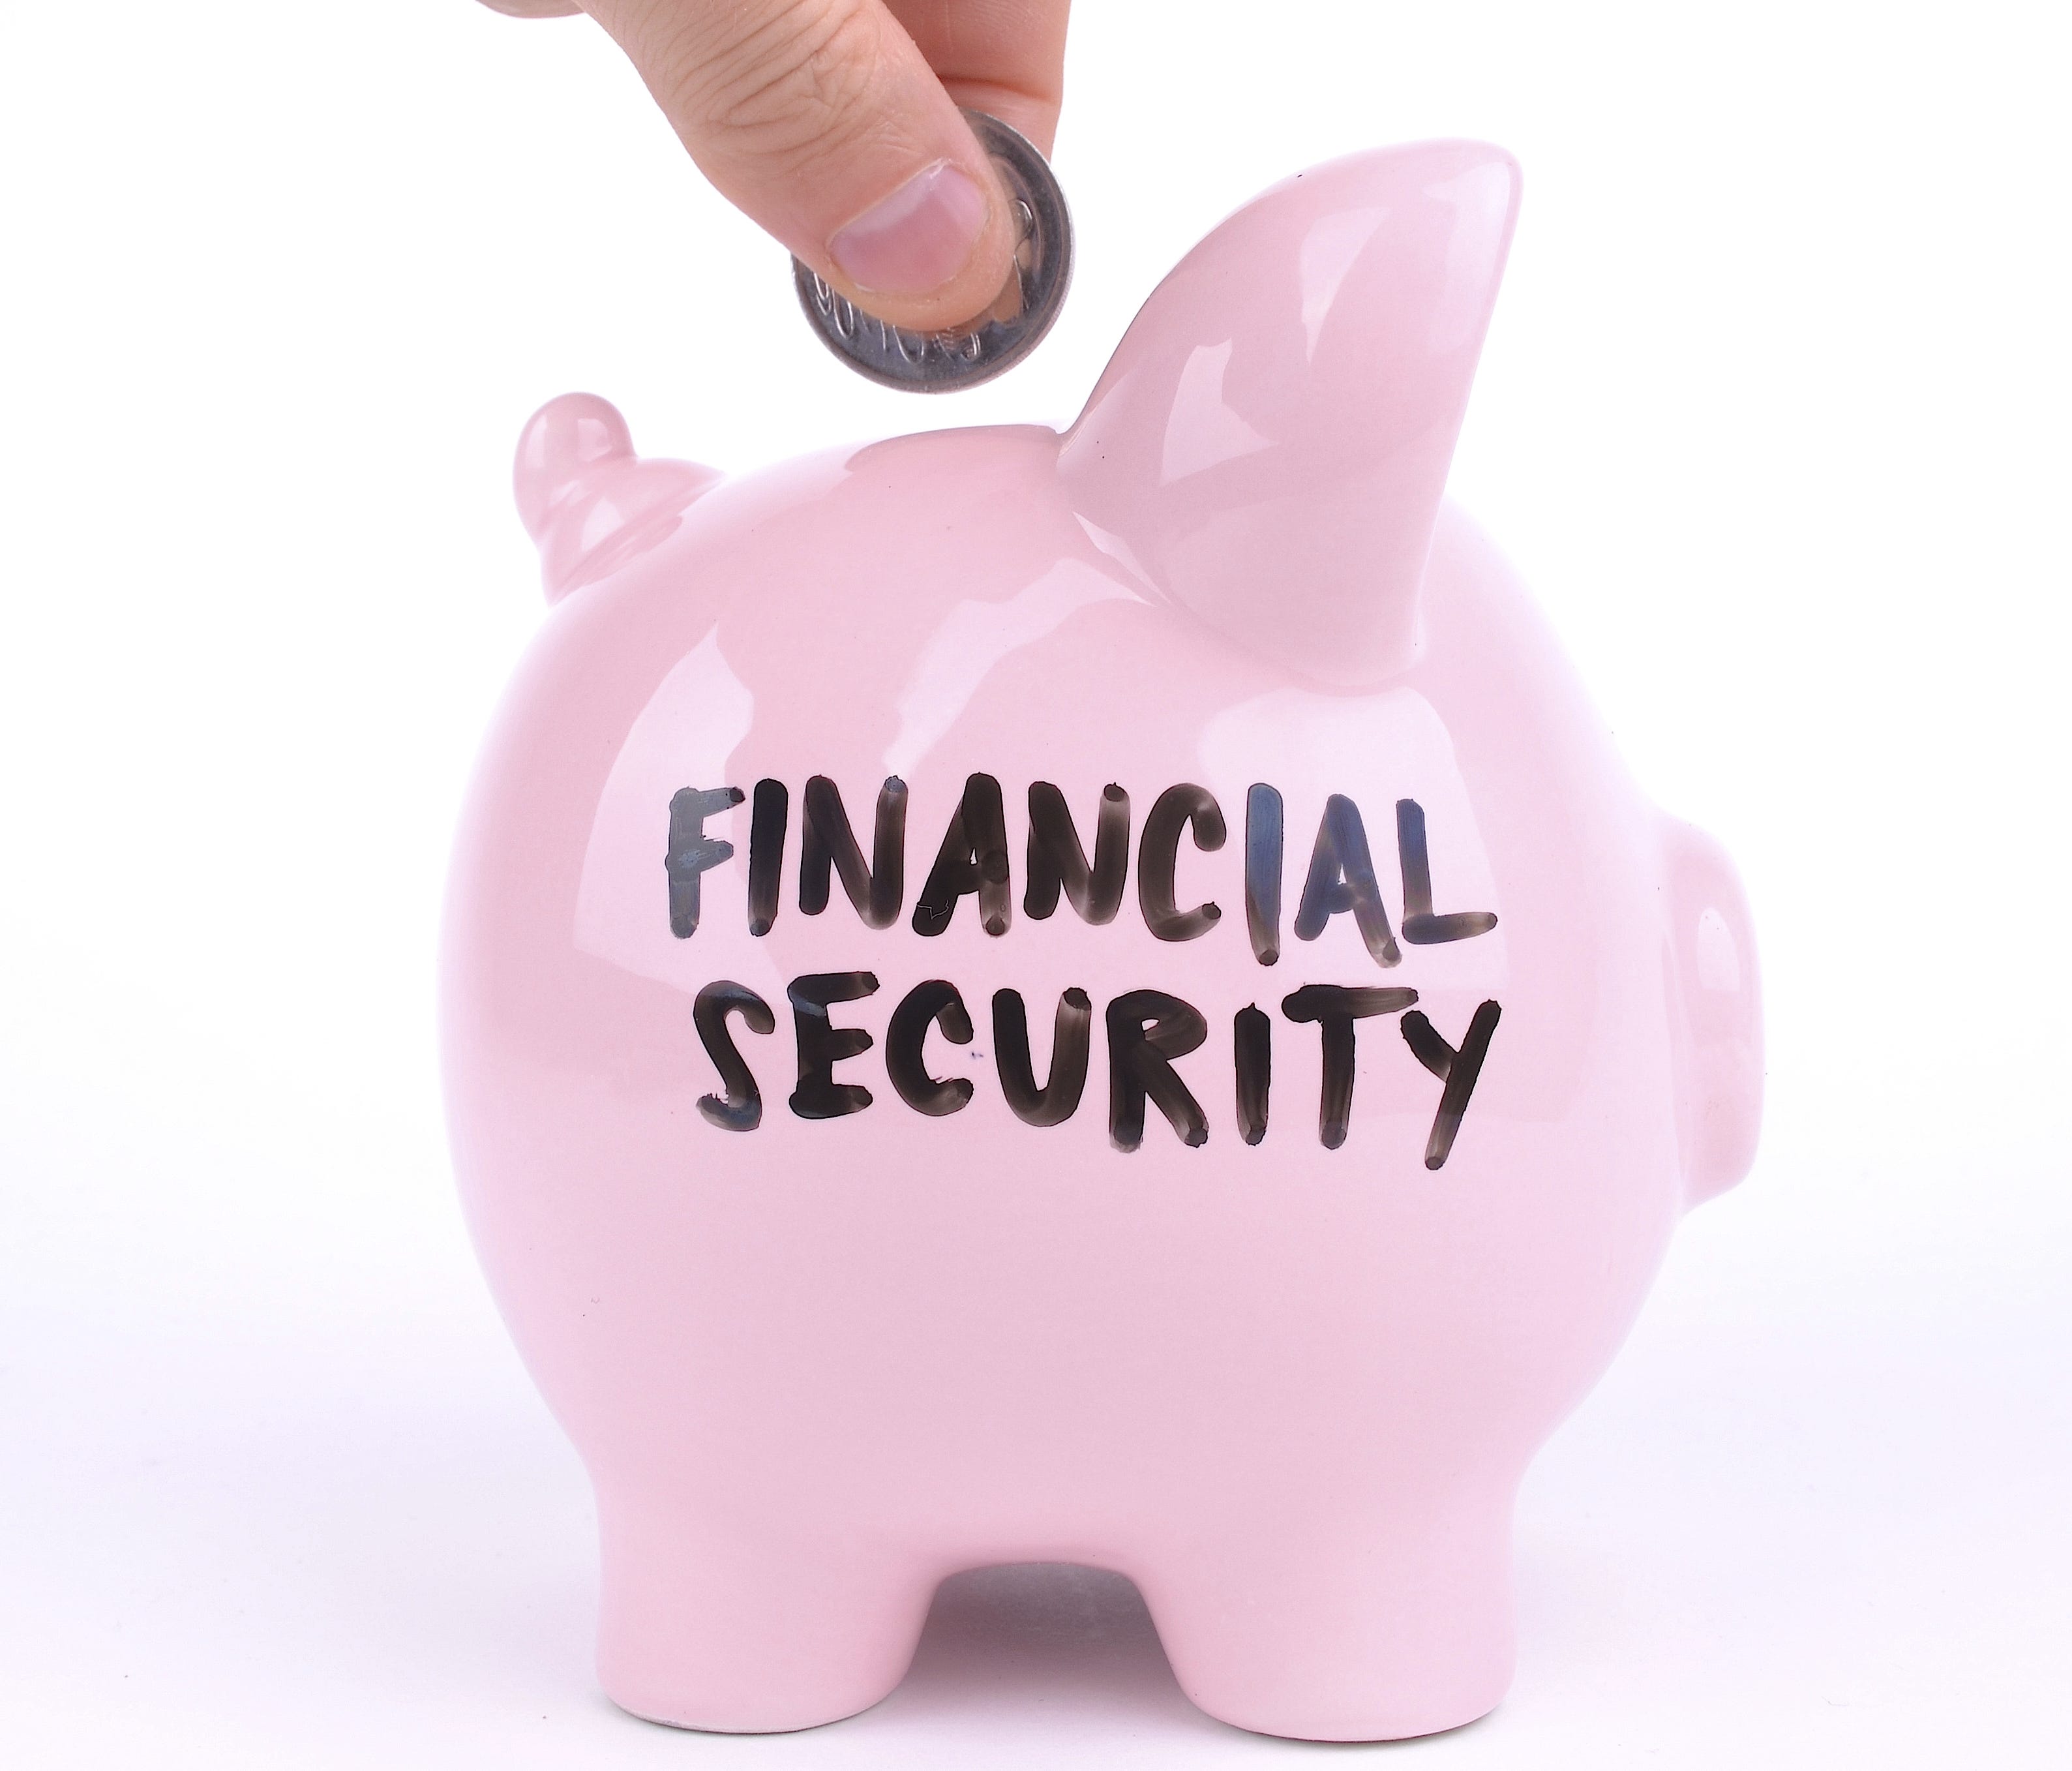 Photo illustration created in 2014 shows a piggy bank for saving toward retirement financial security.